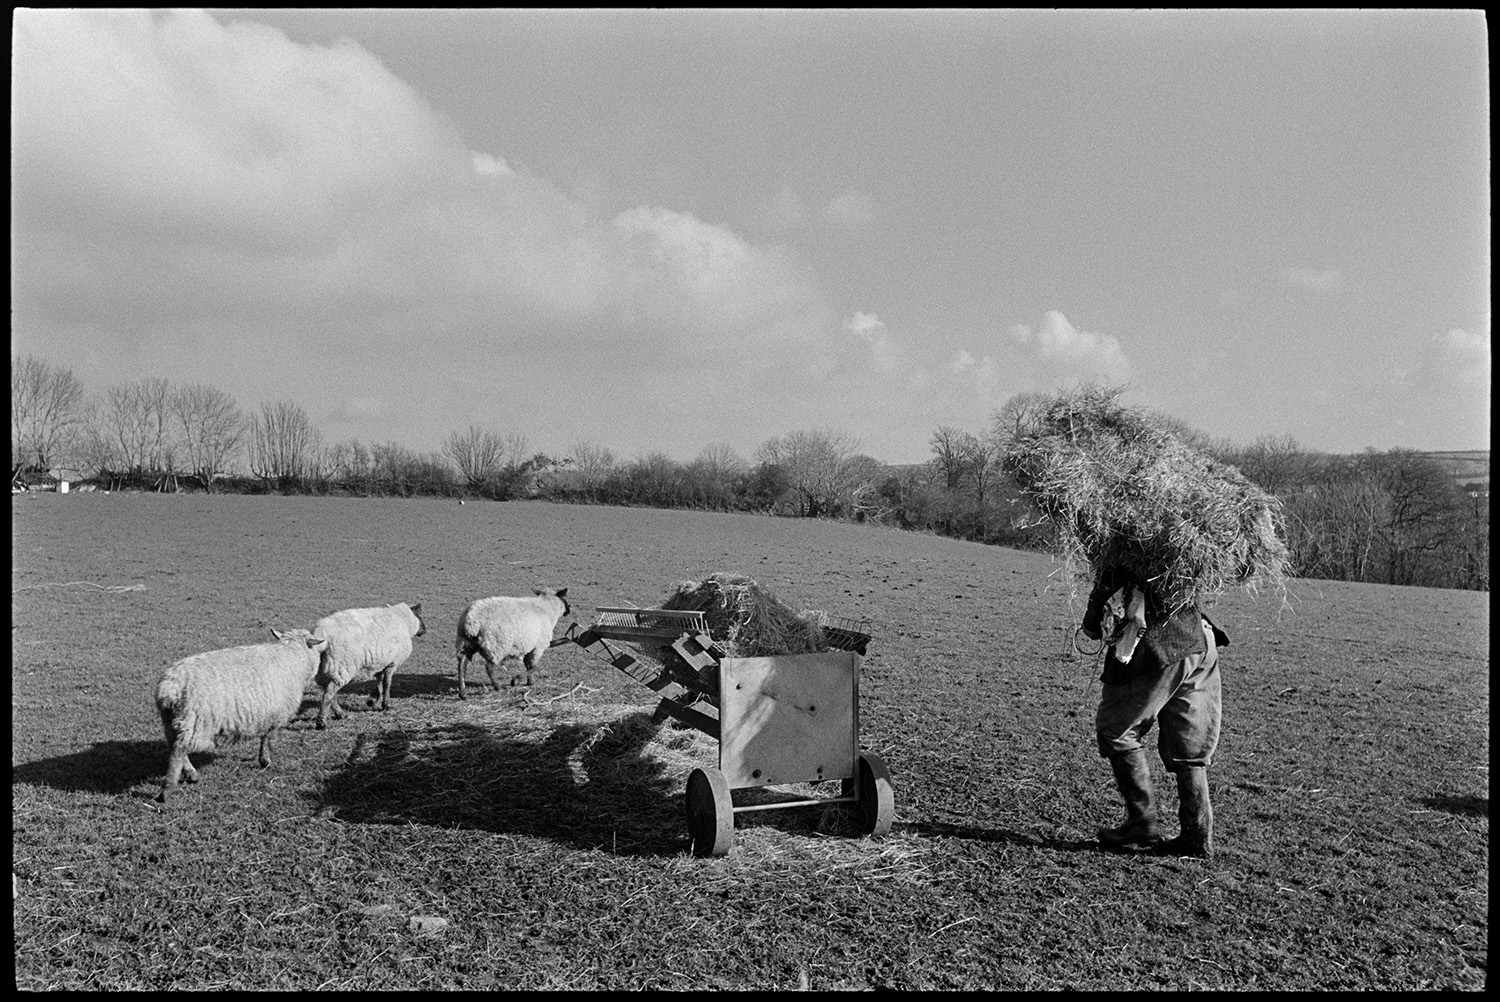 Shepherd feeding sheep, trying to make ewe take to new born lamb.
[George Ayre carrying a bale of hay to a feeder in a field at Ashwell Farm, Dolton. Three sheep are walking past the feeder.]